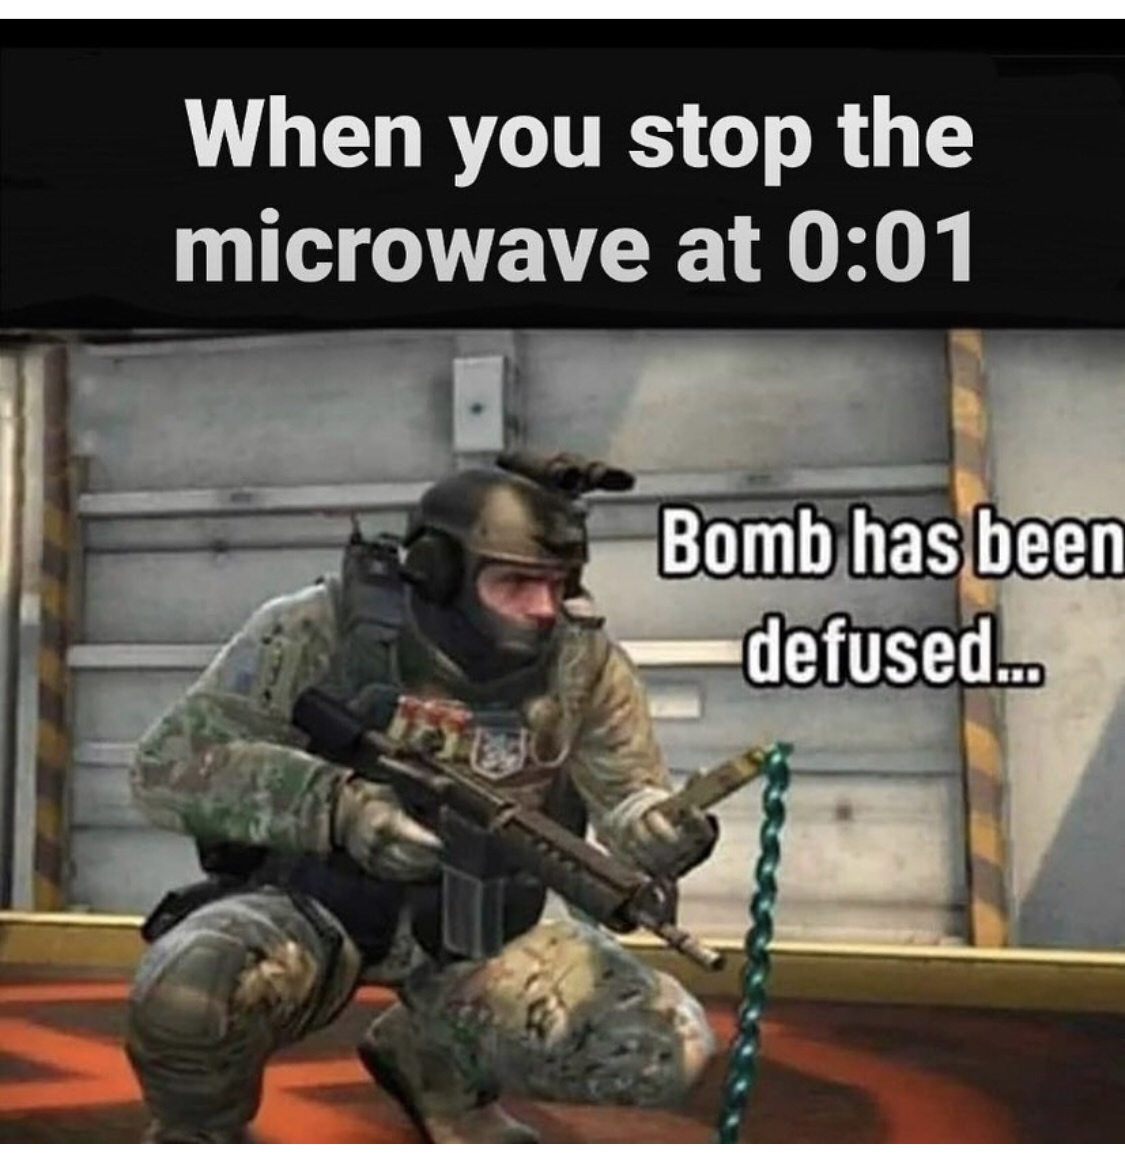 csgo bomb diffuser - When you stop the microwave at Bomb has been defused.